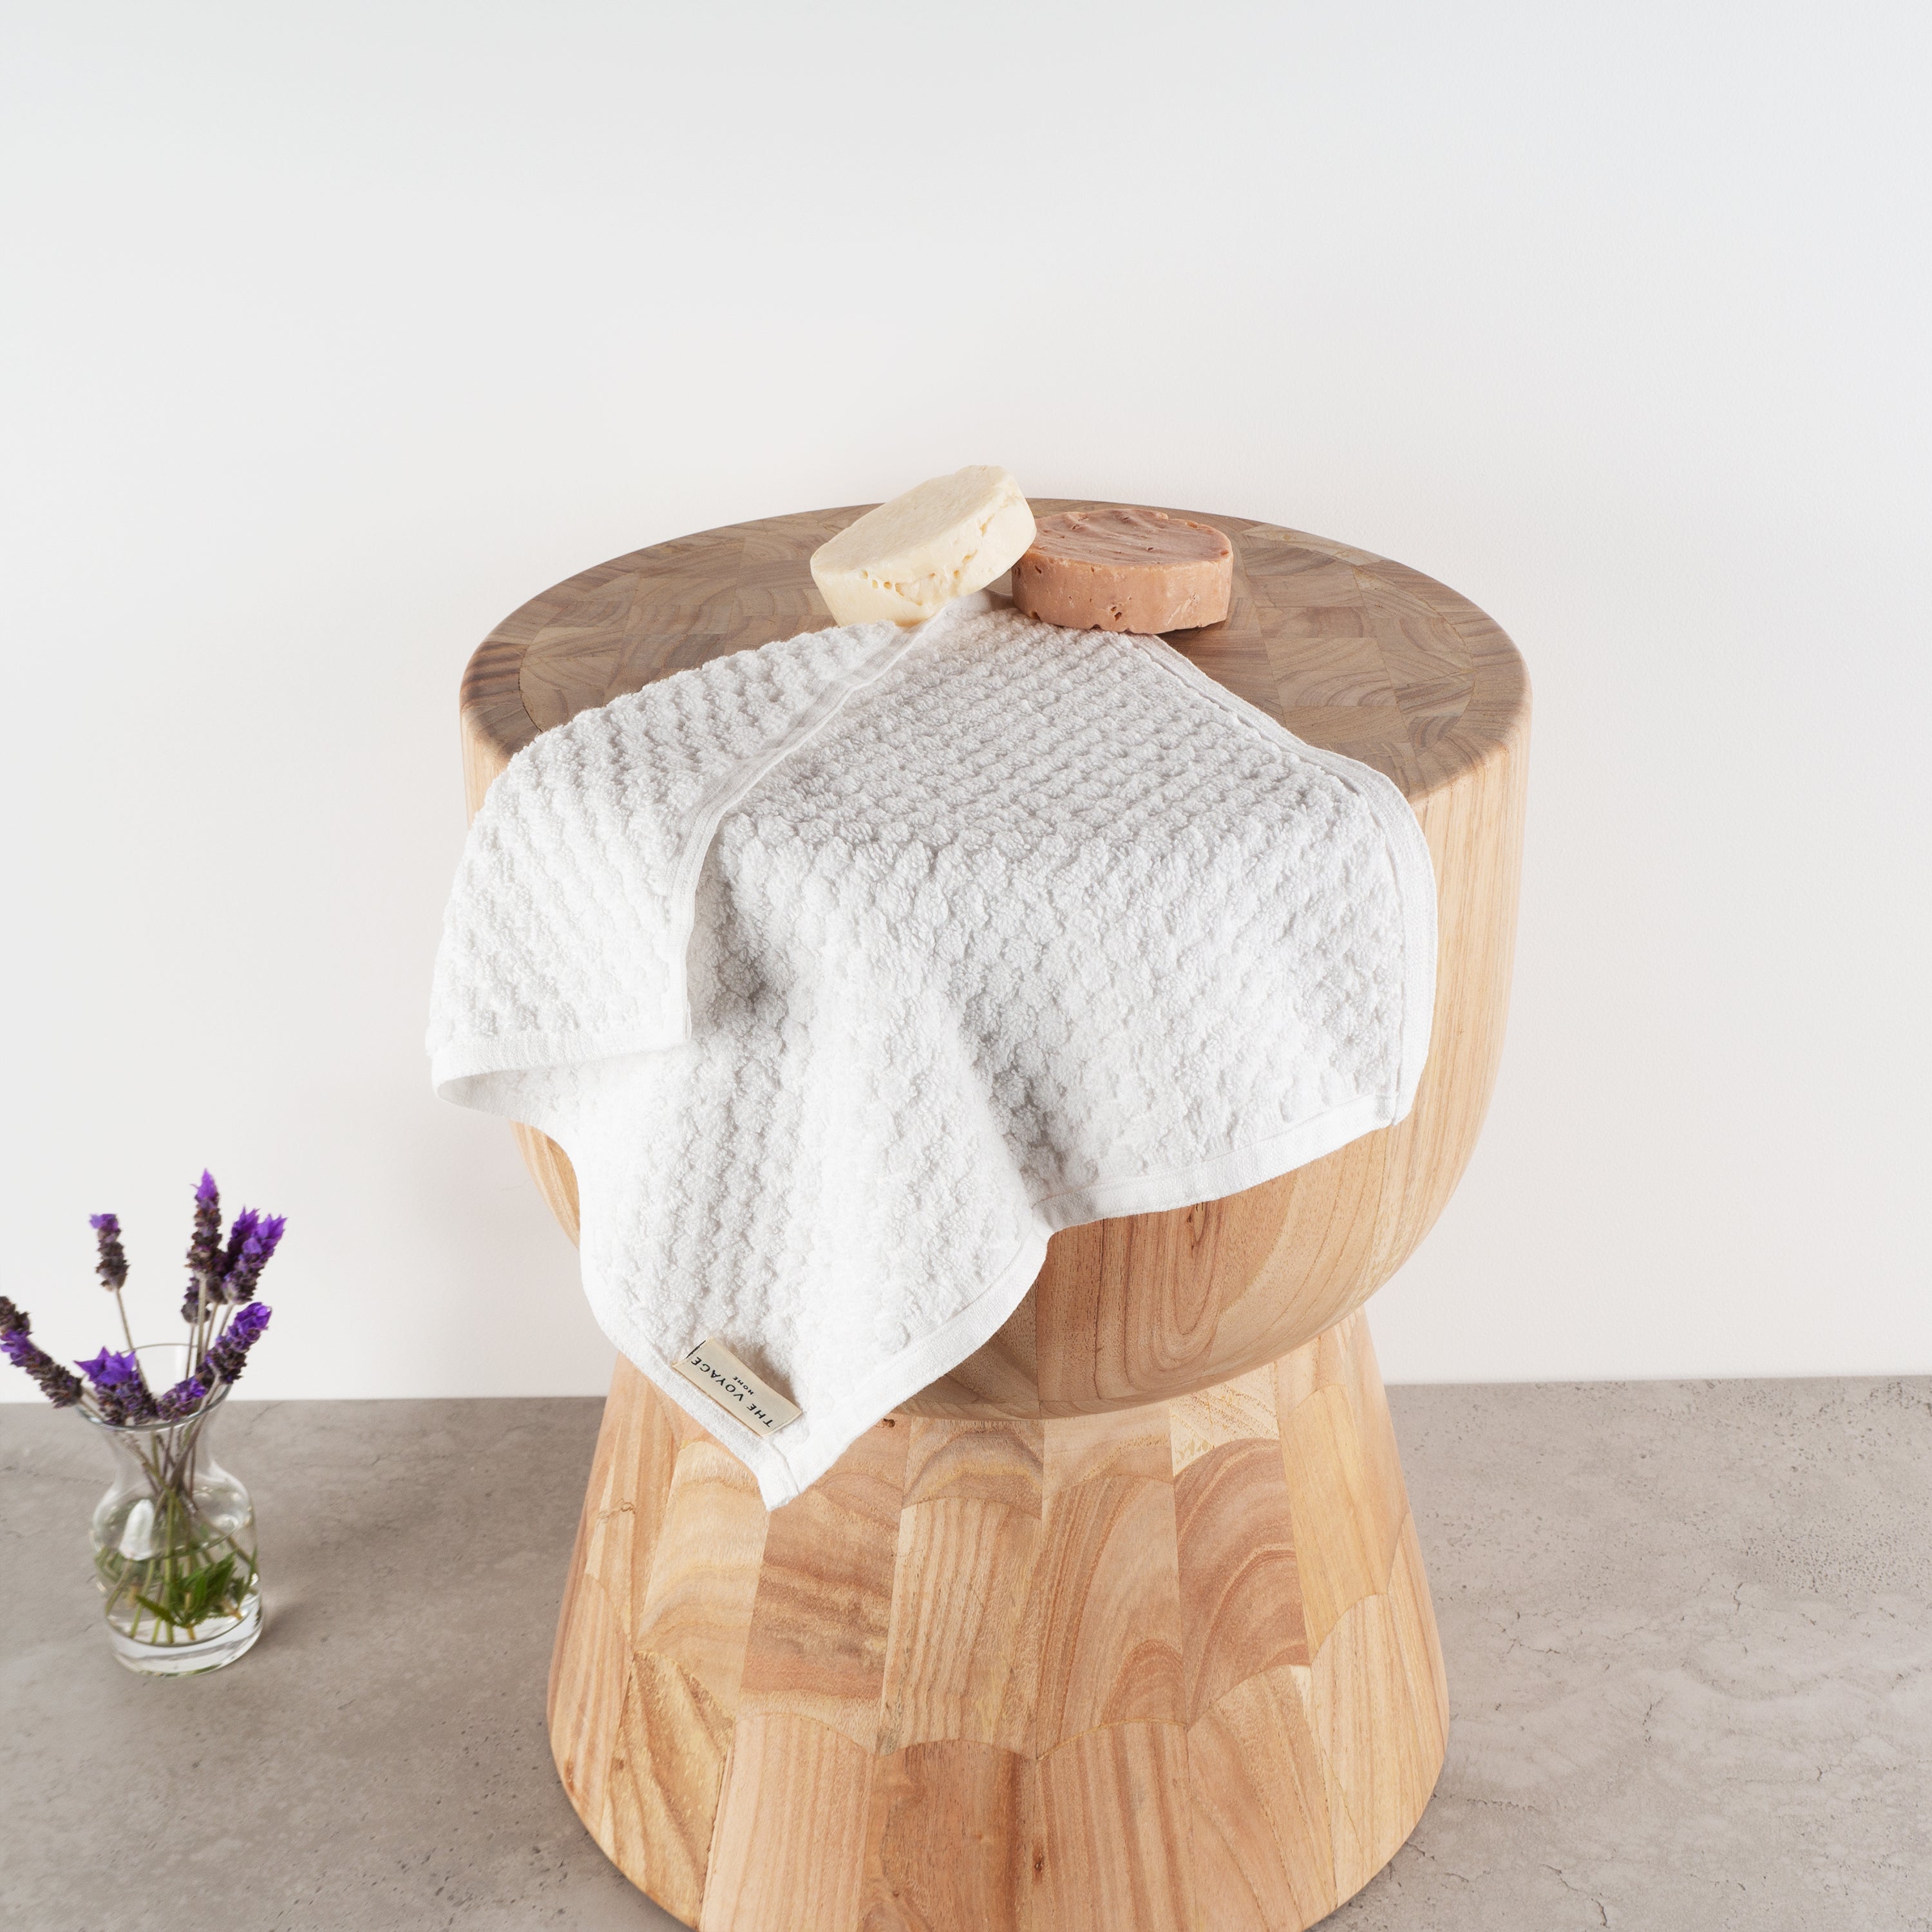 Handwoven white GOTS certified organic cotton Turkish loop face towel draped over wooden stump on grey tiles with soap and lavender